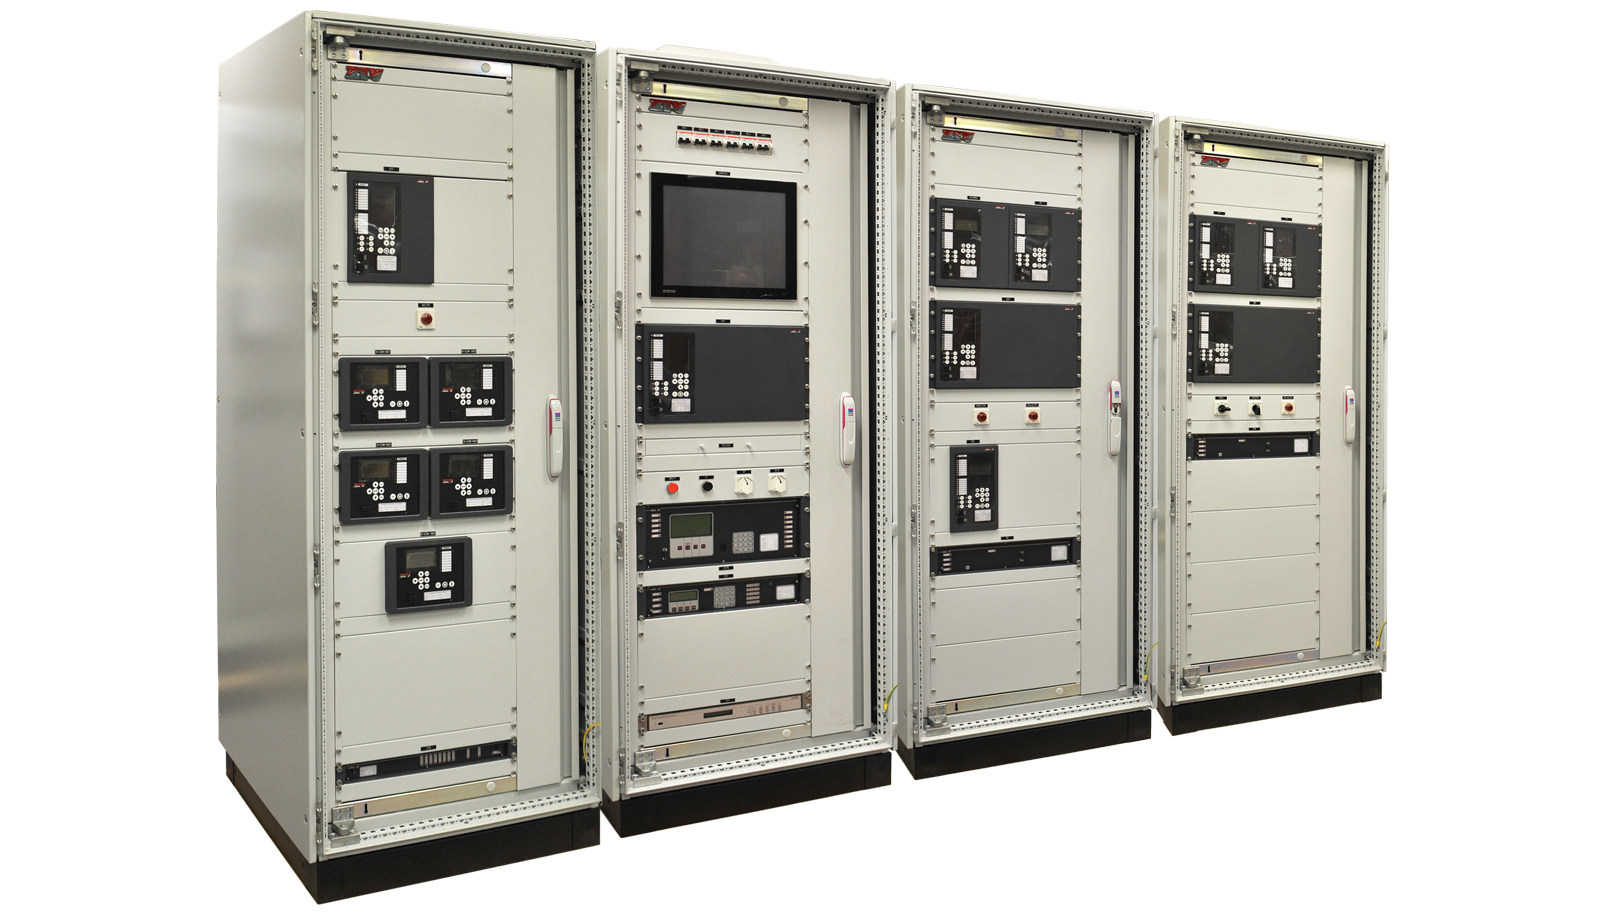 ZIV Substation Automation Systems